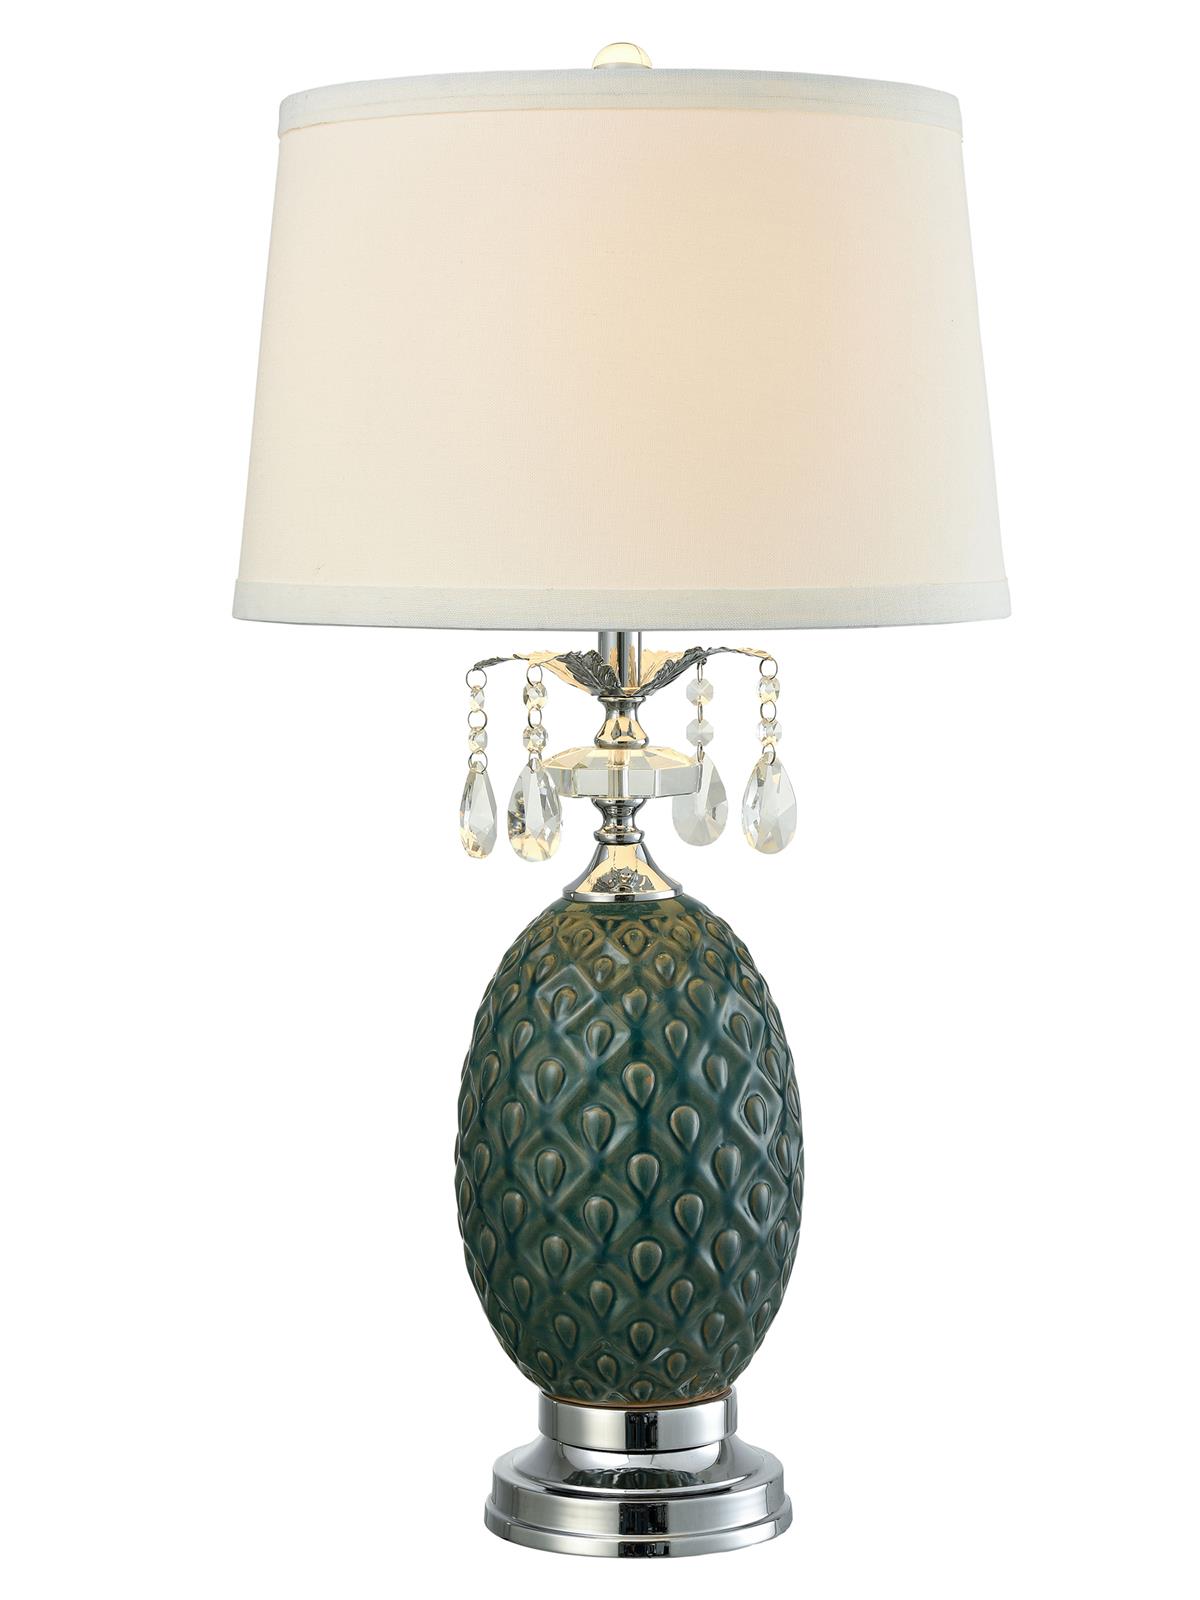 Table Lamp SPRINGDALE MAXIE Contemporary Orb Finial Stepped Pedestal Base-Image 1